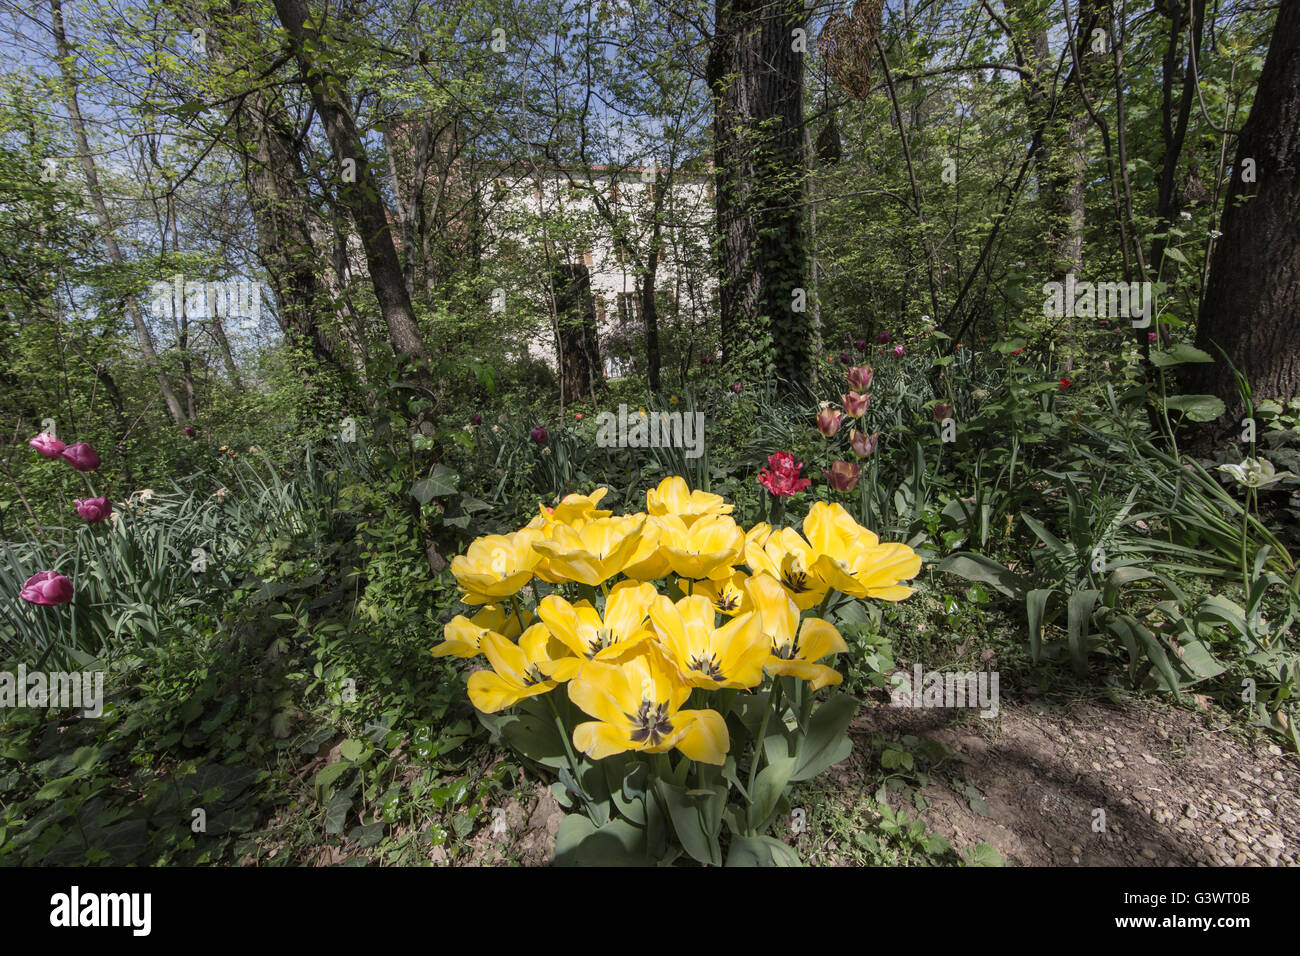 Pralormo castle, flourishing tulips in April for the event "Messer Tulipano",Piedmont,Italy,Europe Stock Photo